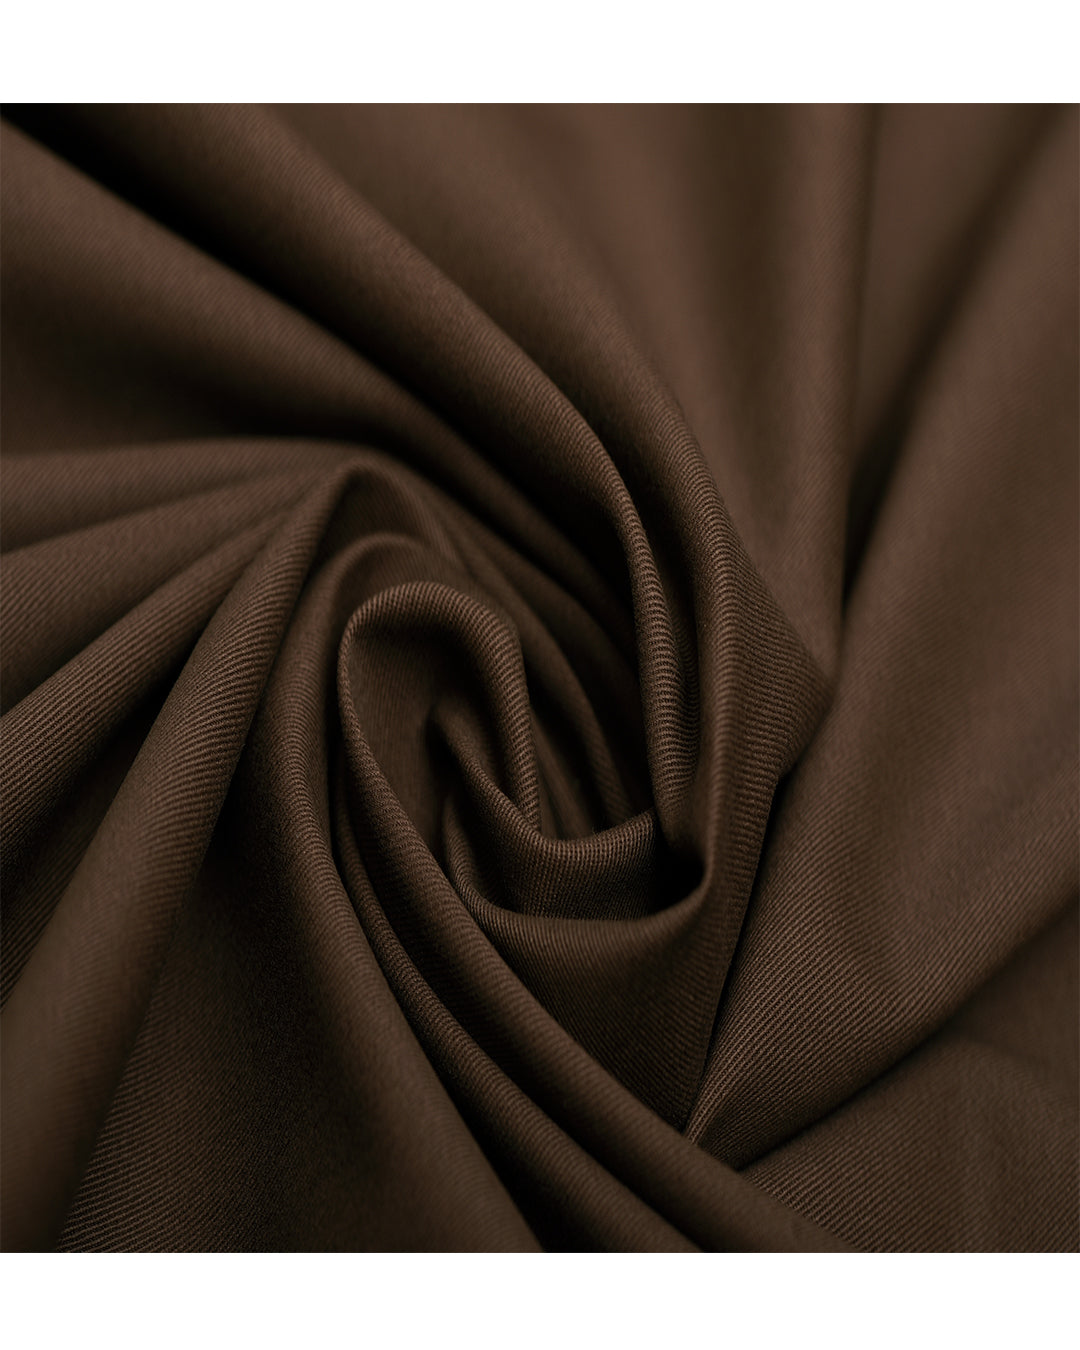 Close up view of custom Genoa Chino pants for men by Luxire in coffee brown